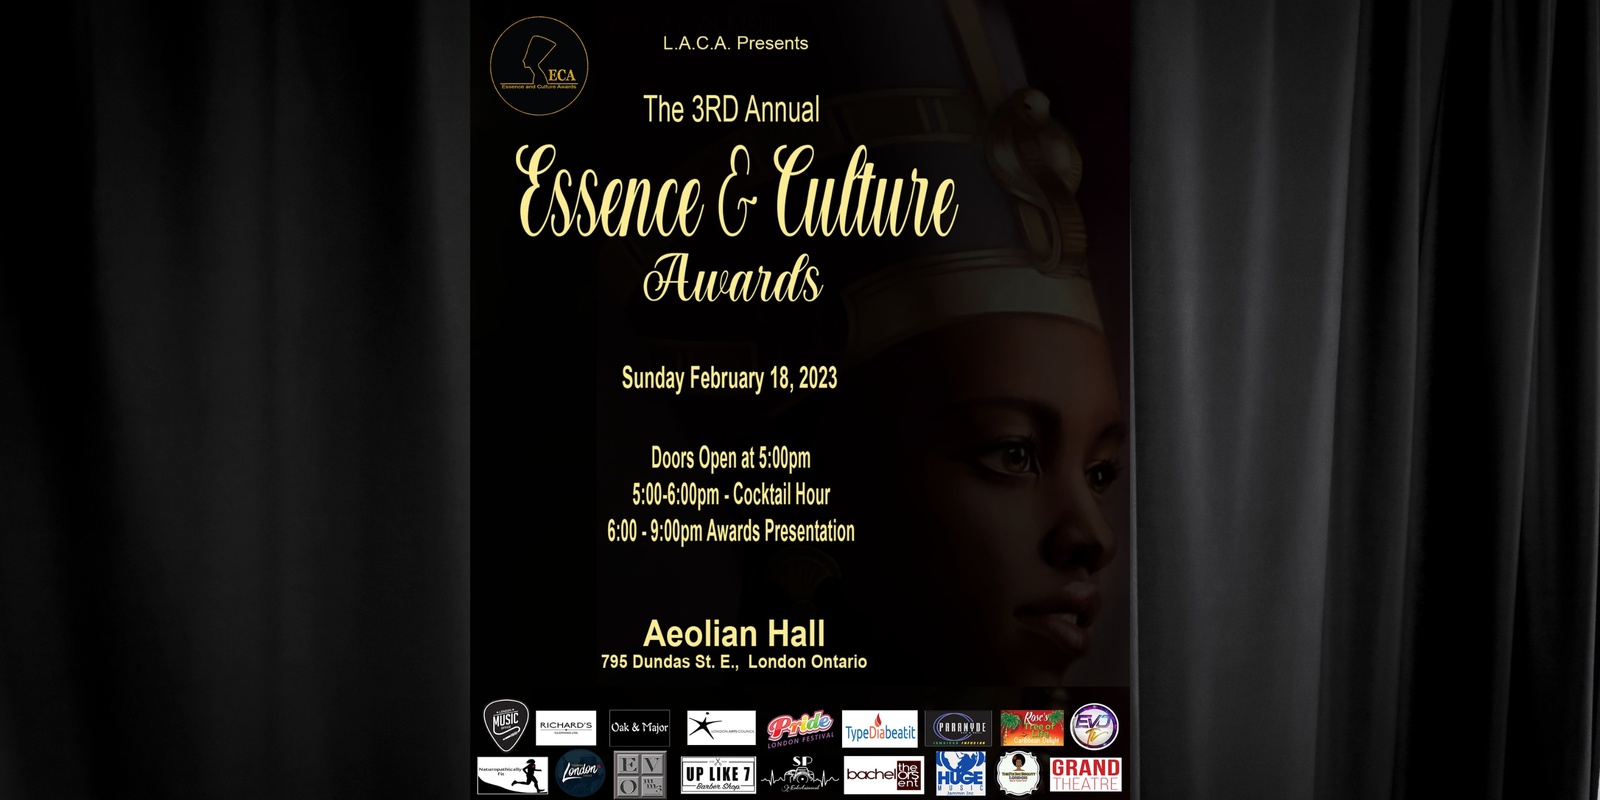 Banner image for The 3rd Annual Essence & Culture Awards